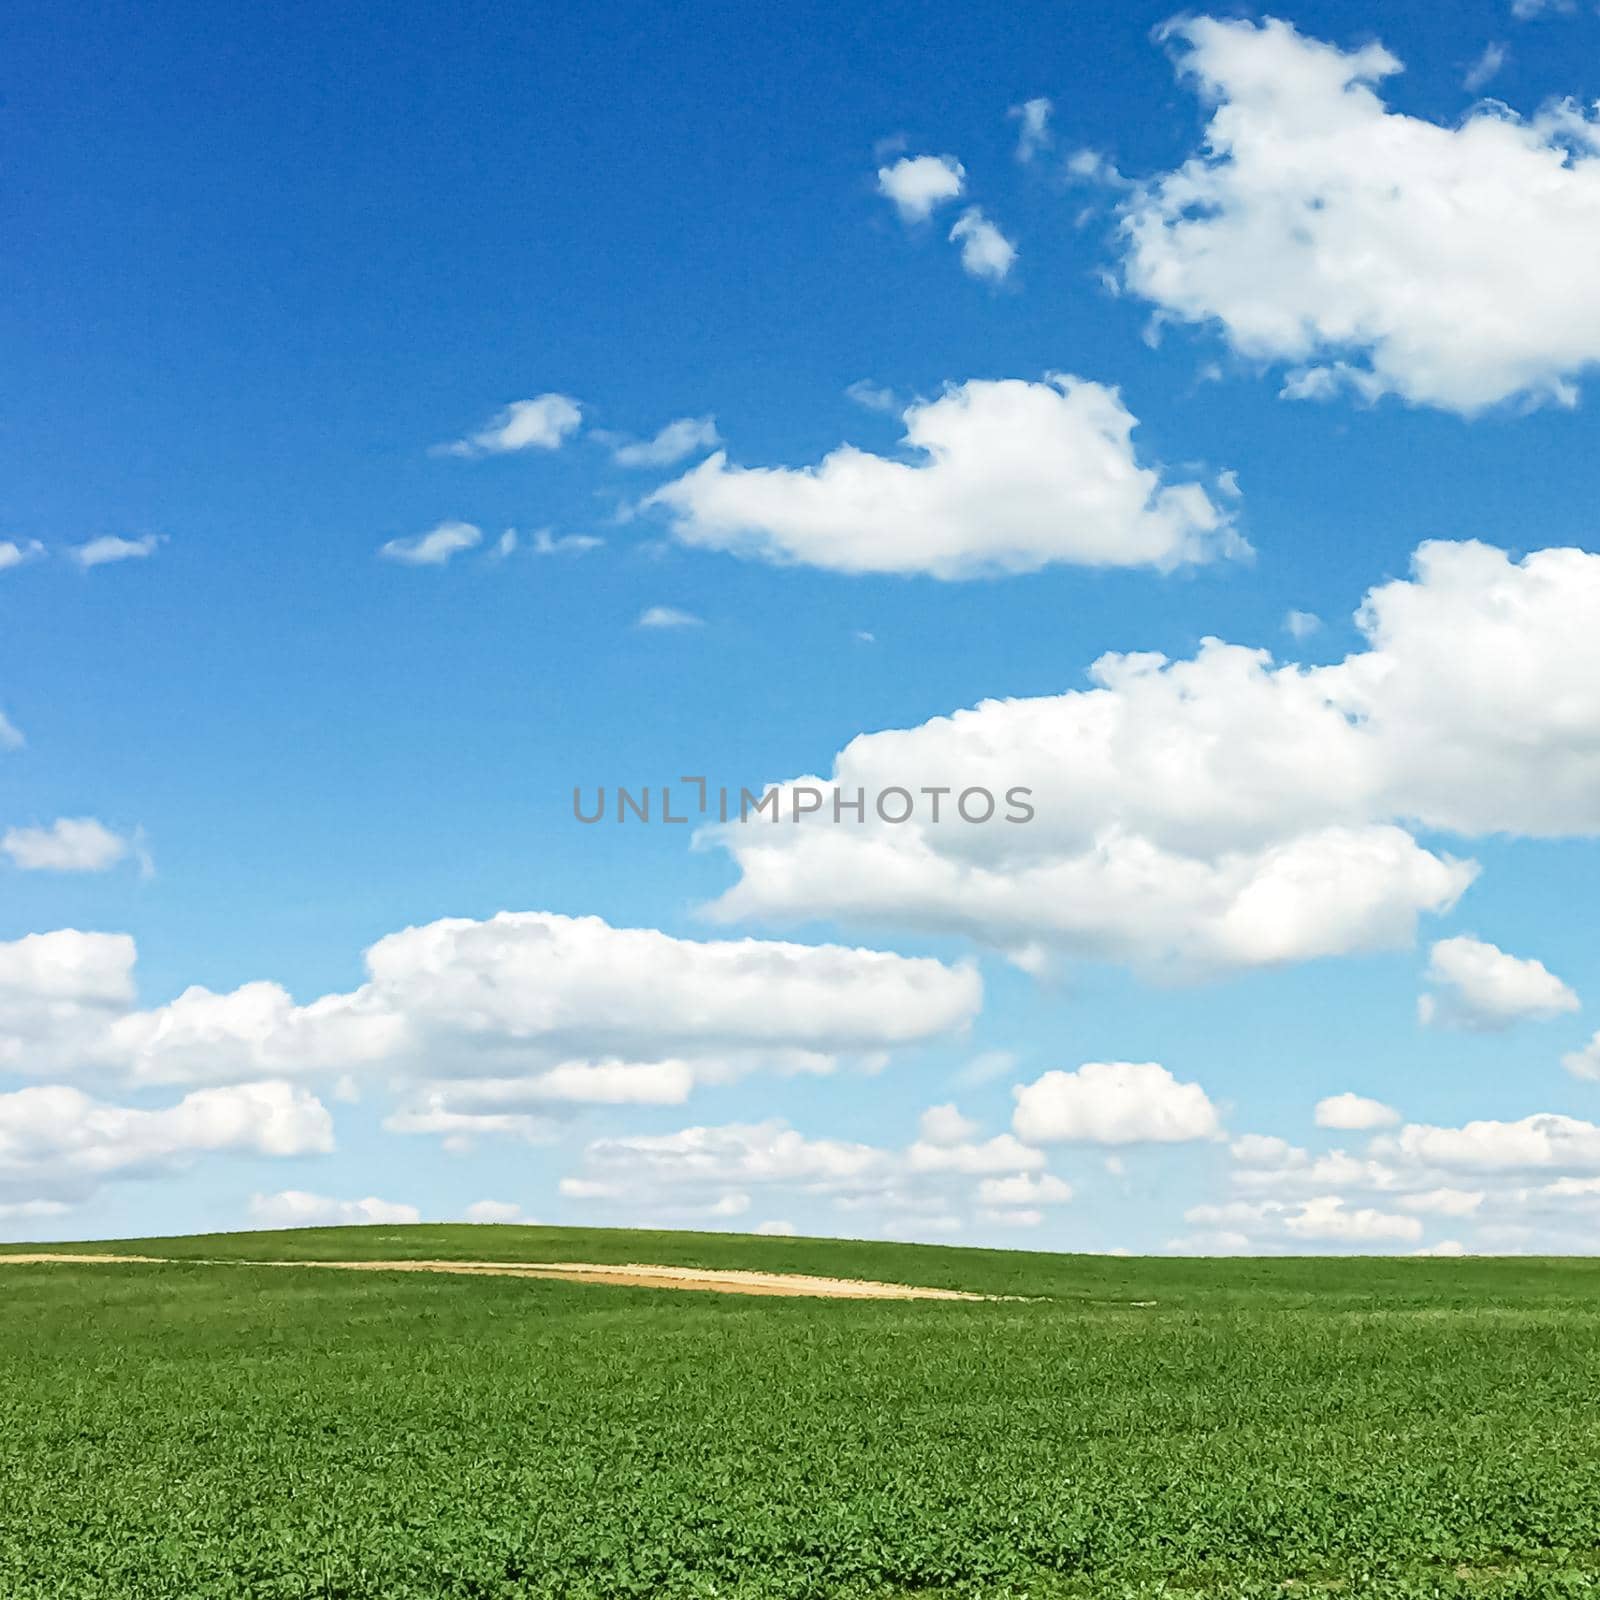 Green field and blue sky with clouds, beautiful meadow as nature and environmental background.